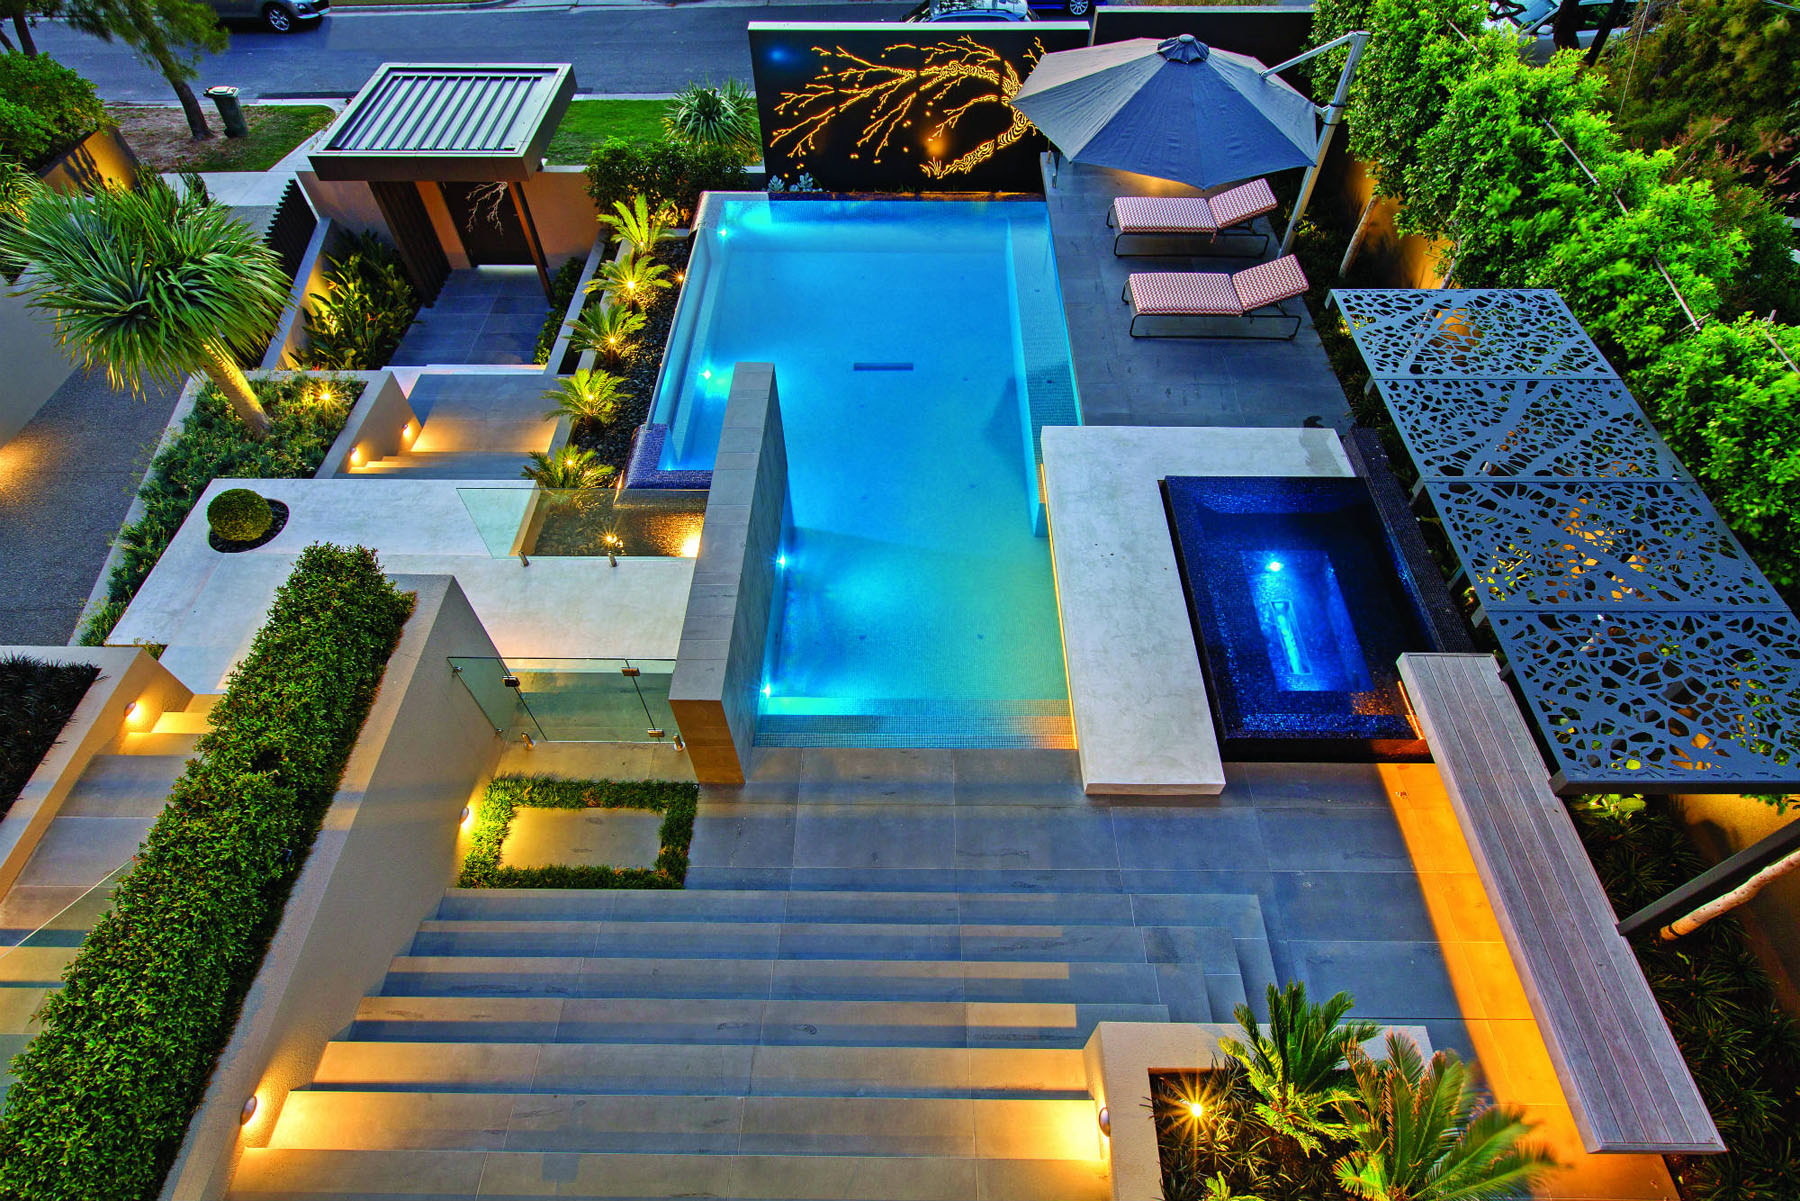 water feature design ideas - get inspired by photos of